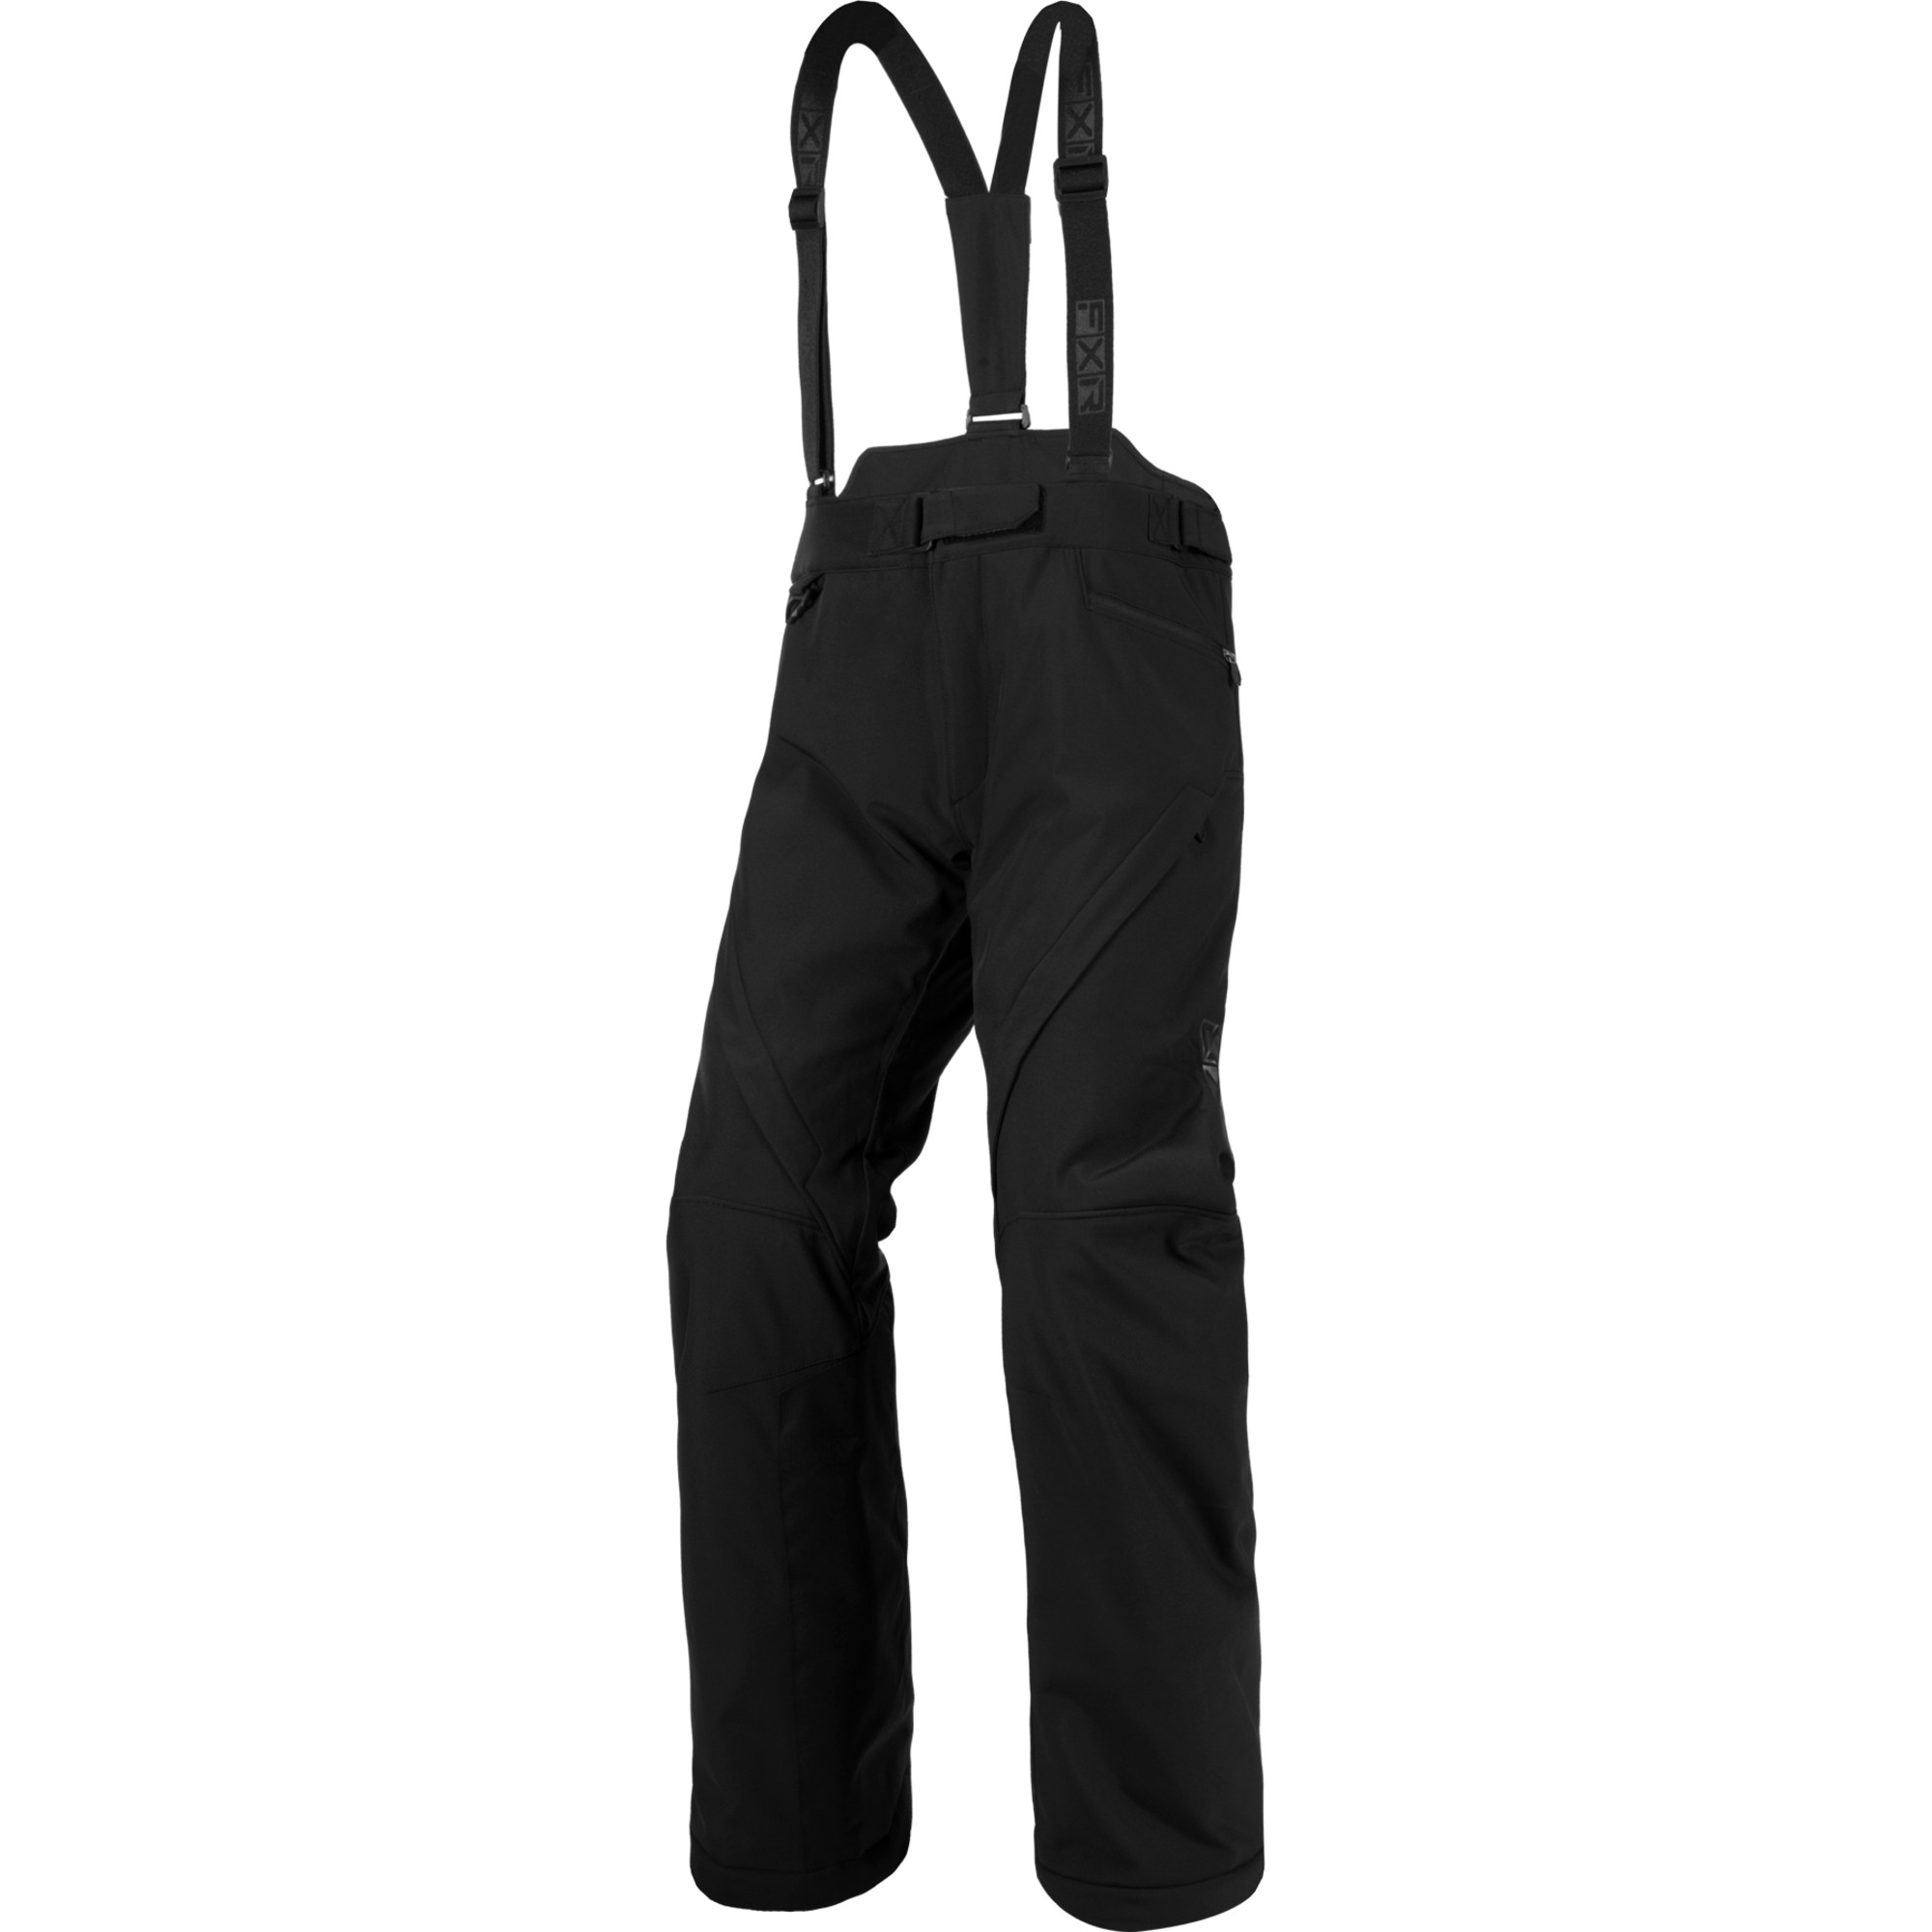   vertical pro insulated softshell black